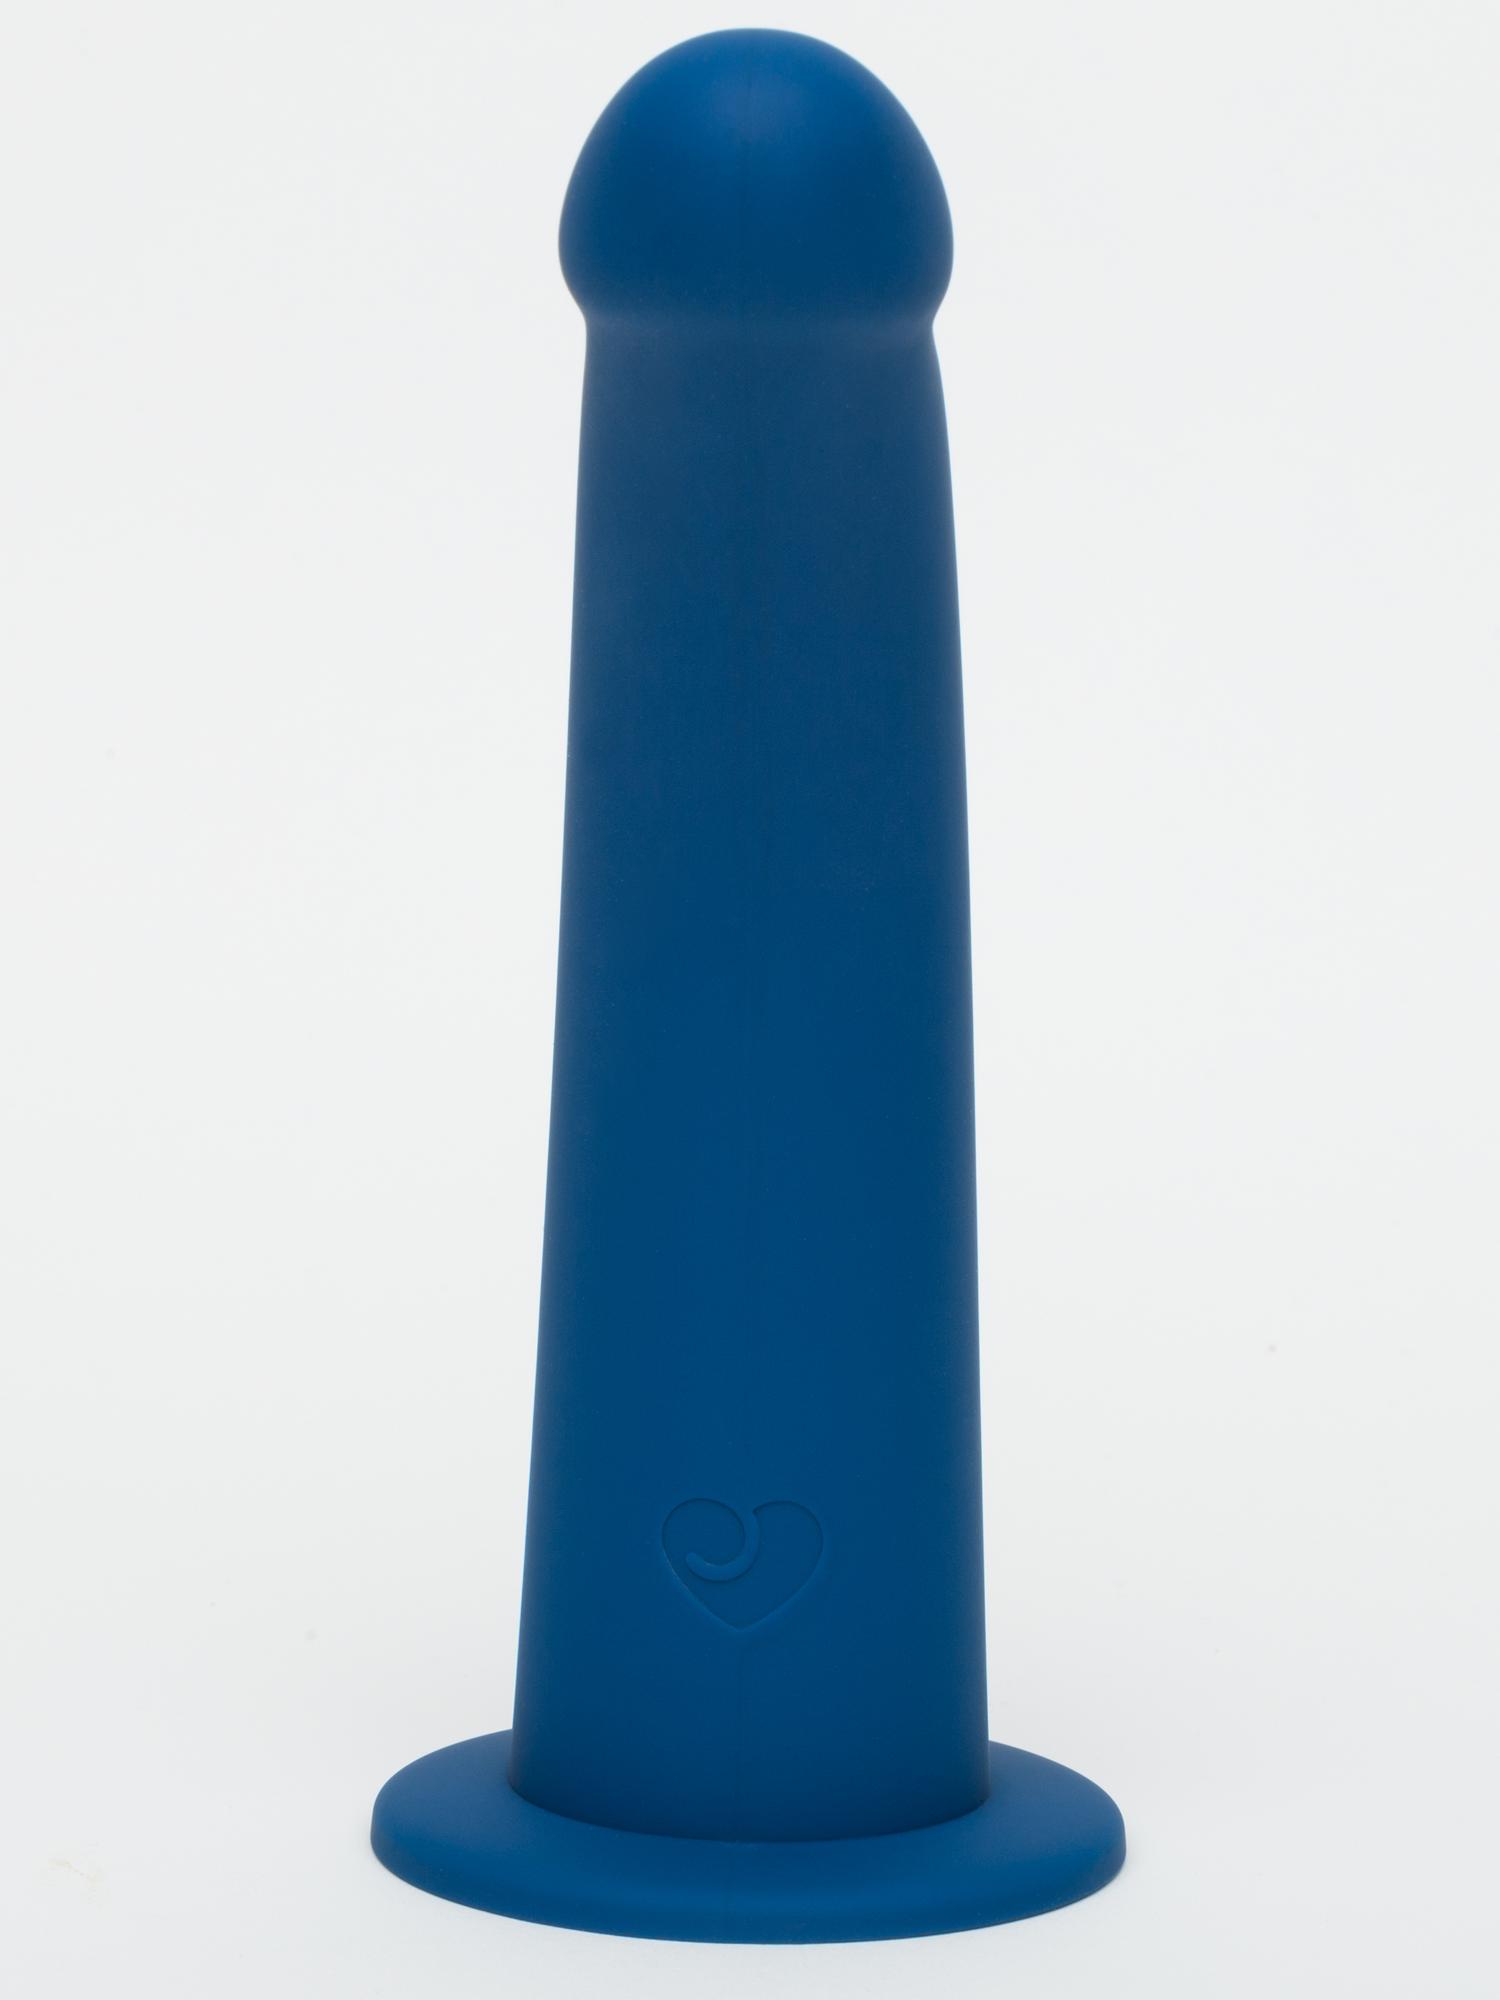 Lovehoney Curved Suction Cup Dildo. Slide 2